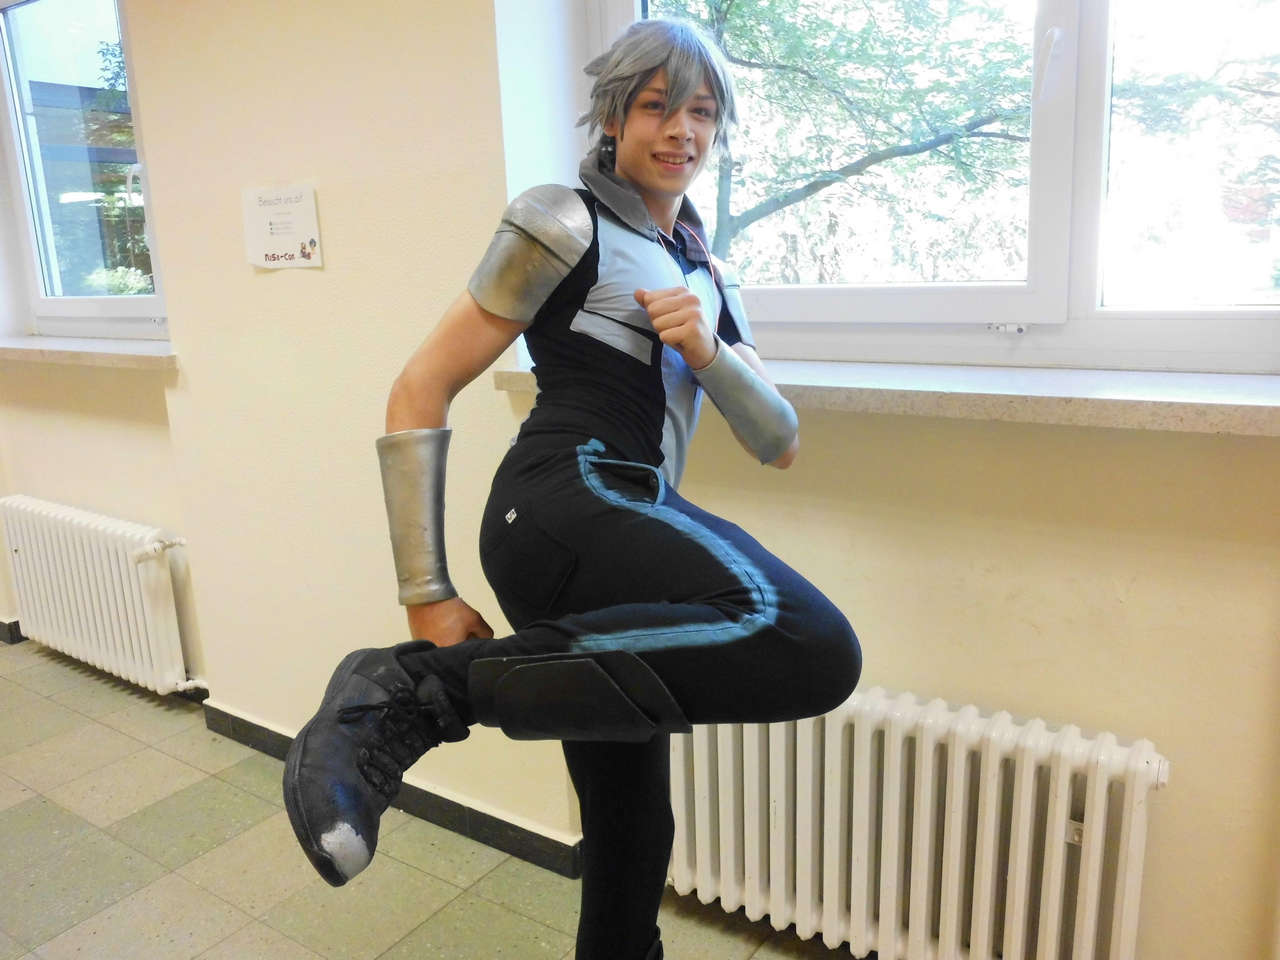 I Find An Amazing Mercury Cosplayer At A German Co